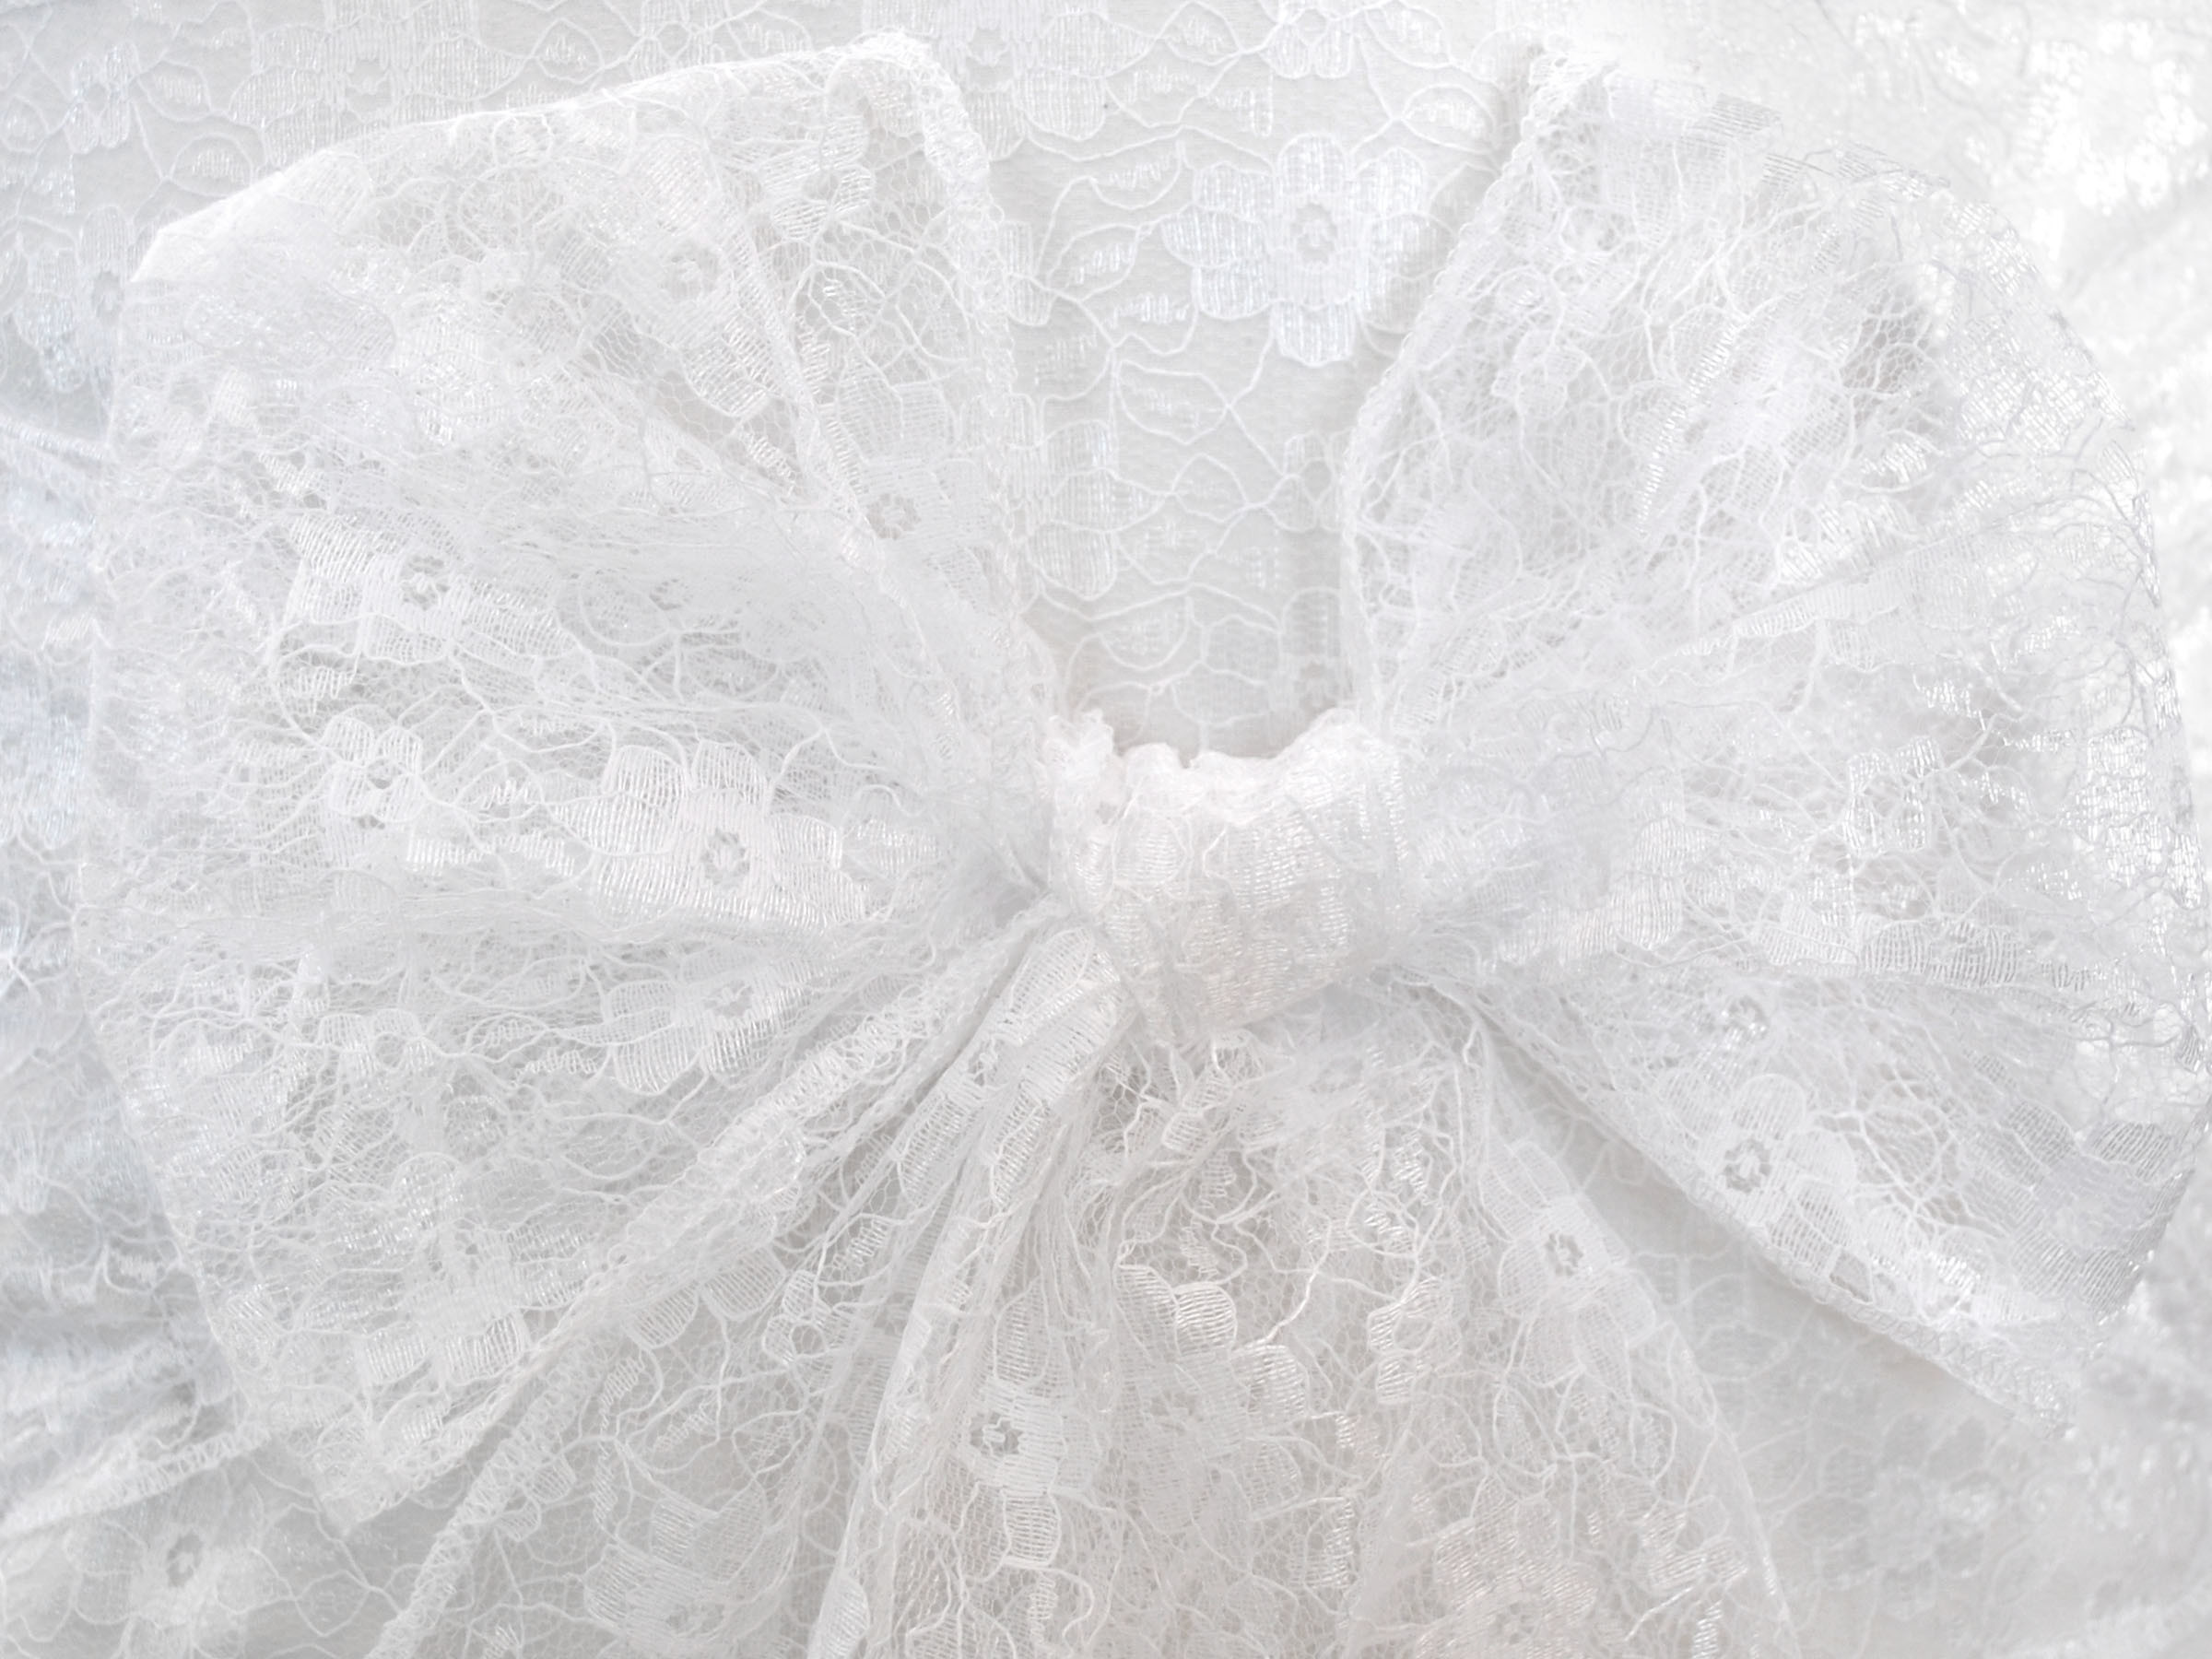 2400x1800 Tumblr Backgrounds White Lace The white thread - page 2